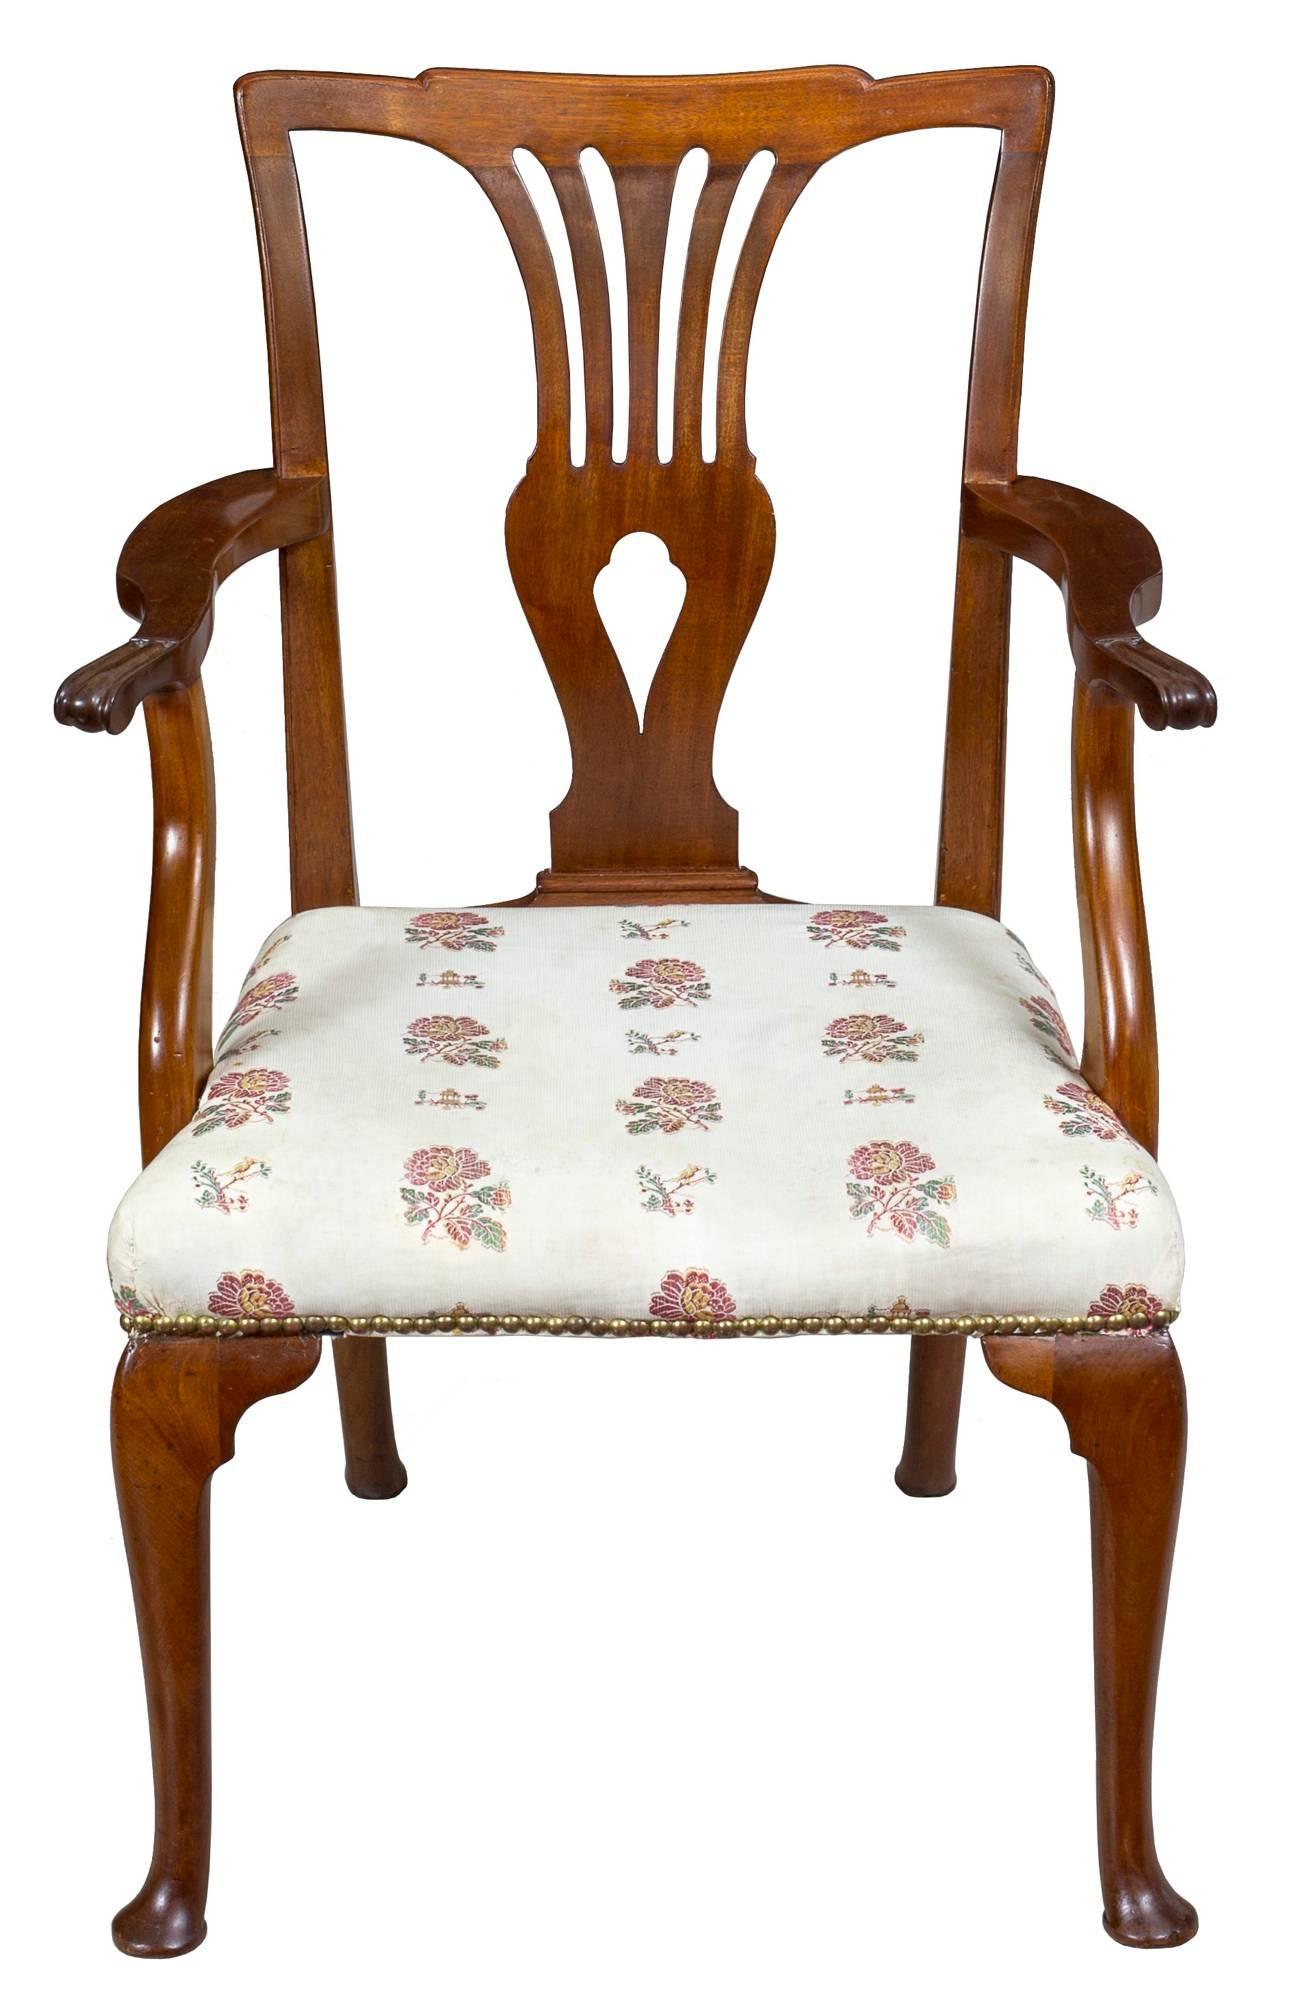 This Queen Anne armchair is supported by well-formed cabriole feet, and note, the rear legs have a desirable stylish camber to them. The legs have had no splices or breaks and are in perfect condition, as is the rest of the chair. The arms are